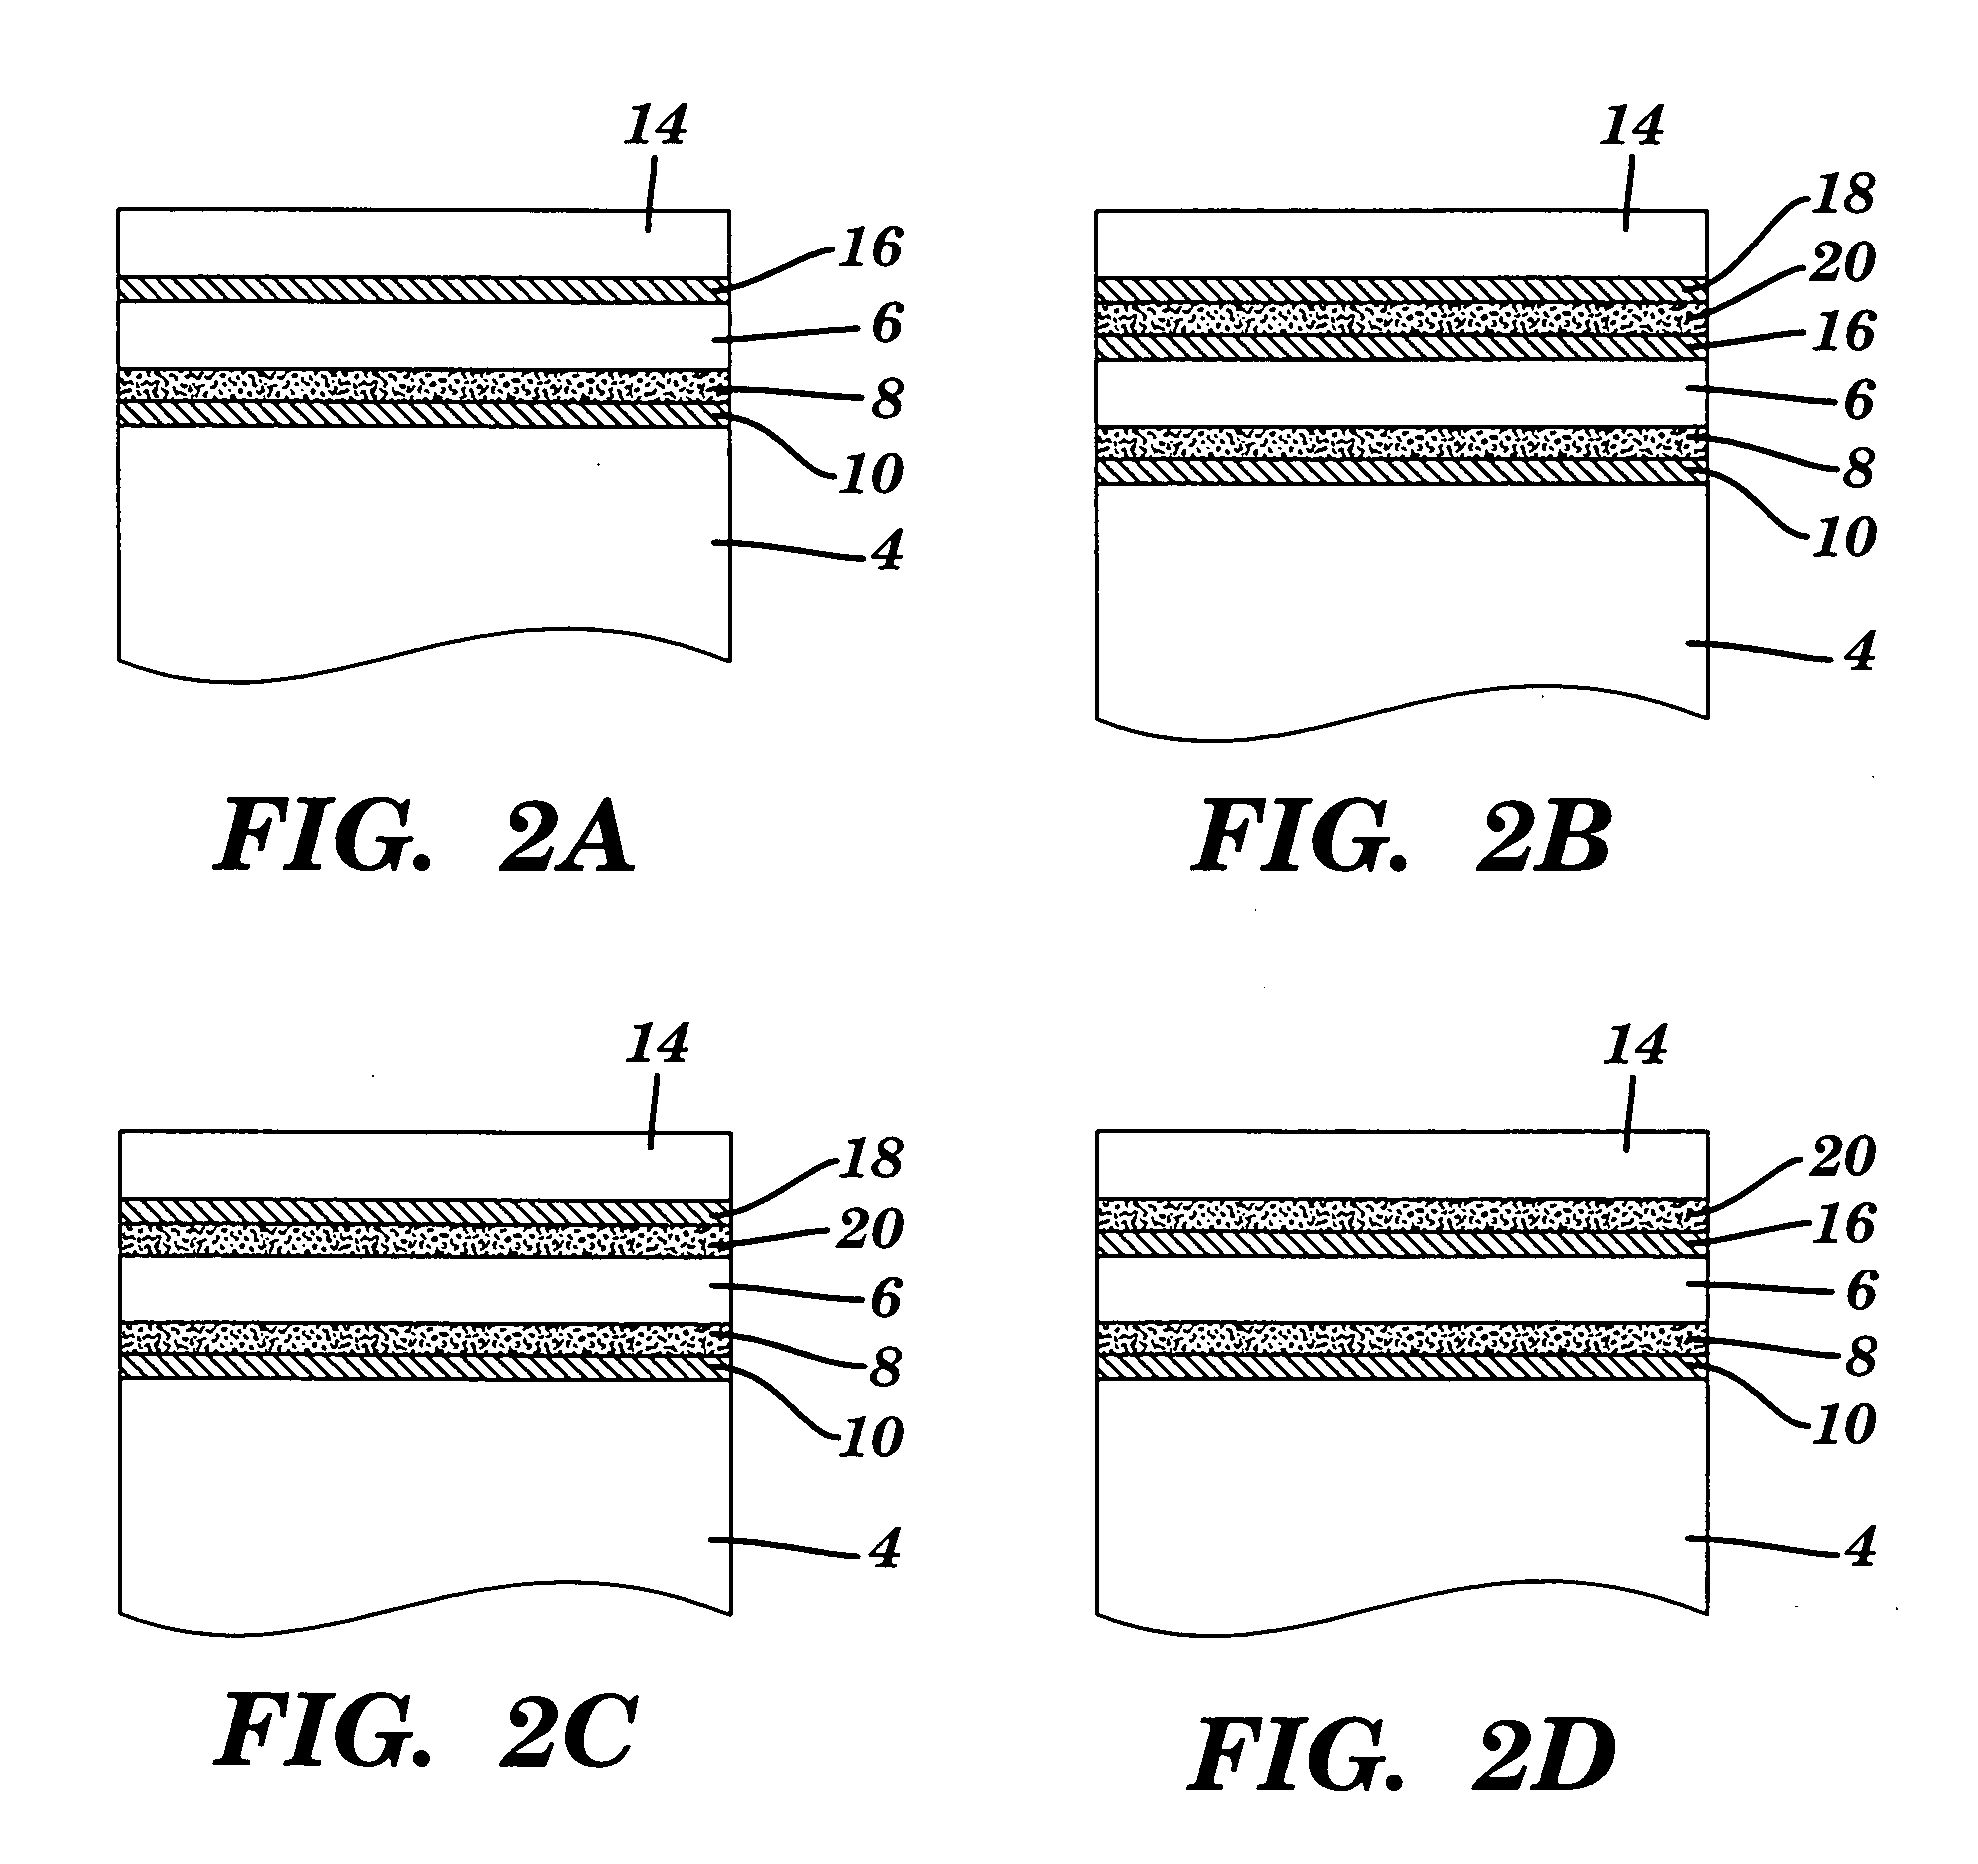 Methods and materials for reducing damage from environmental electromagnetic effects